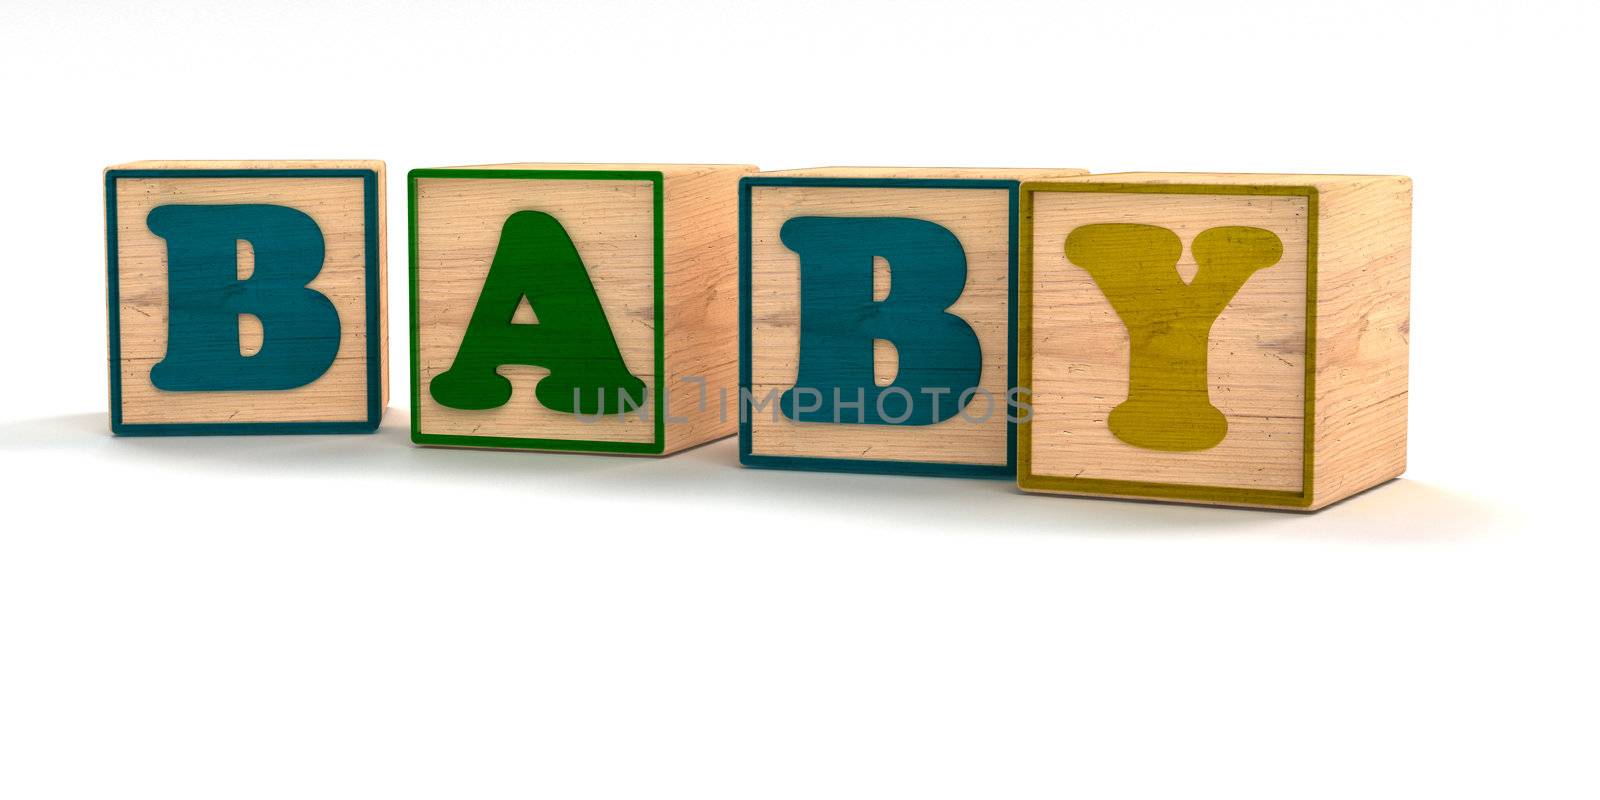 Baby Spelled out In Child Color Blocks Angled with White Background and soft shadows